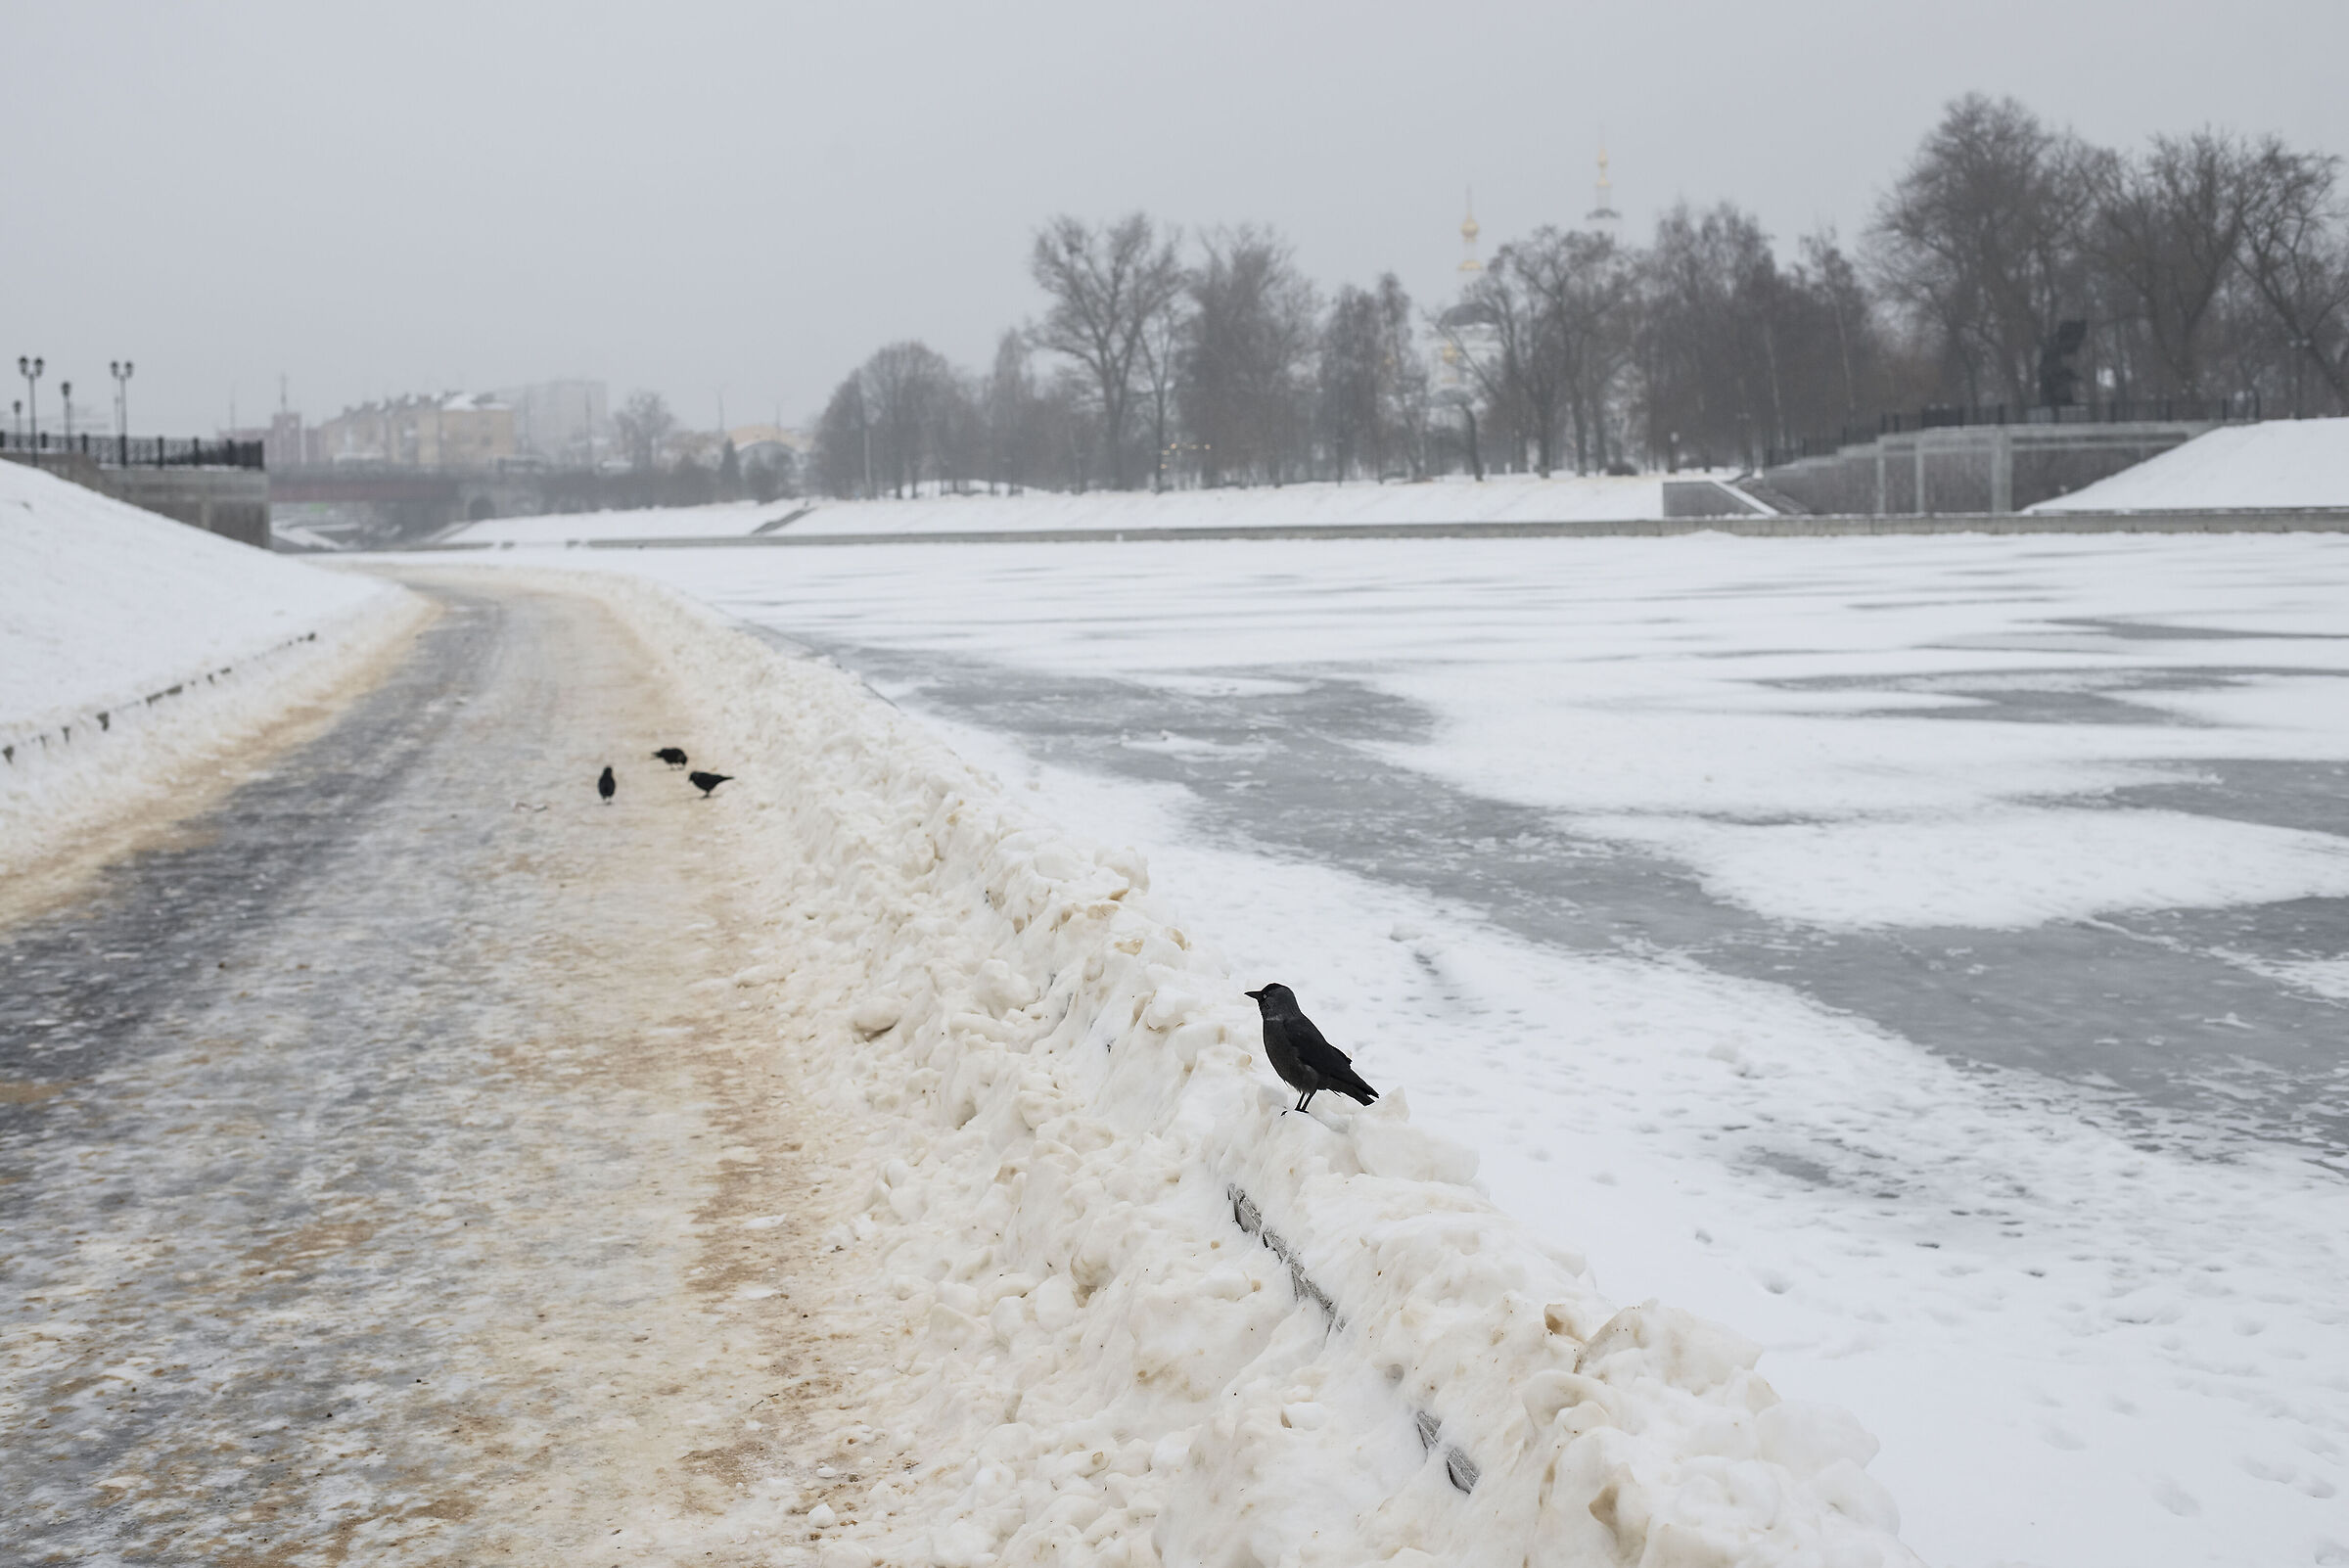 Protection of the Winter embankment...